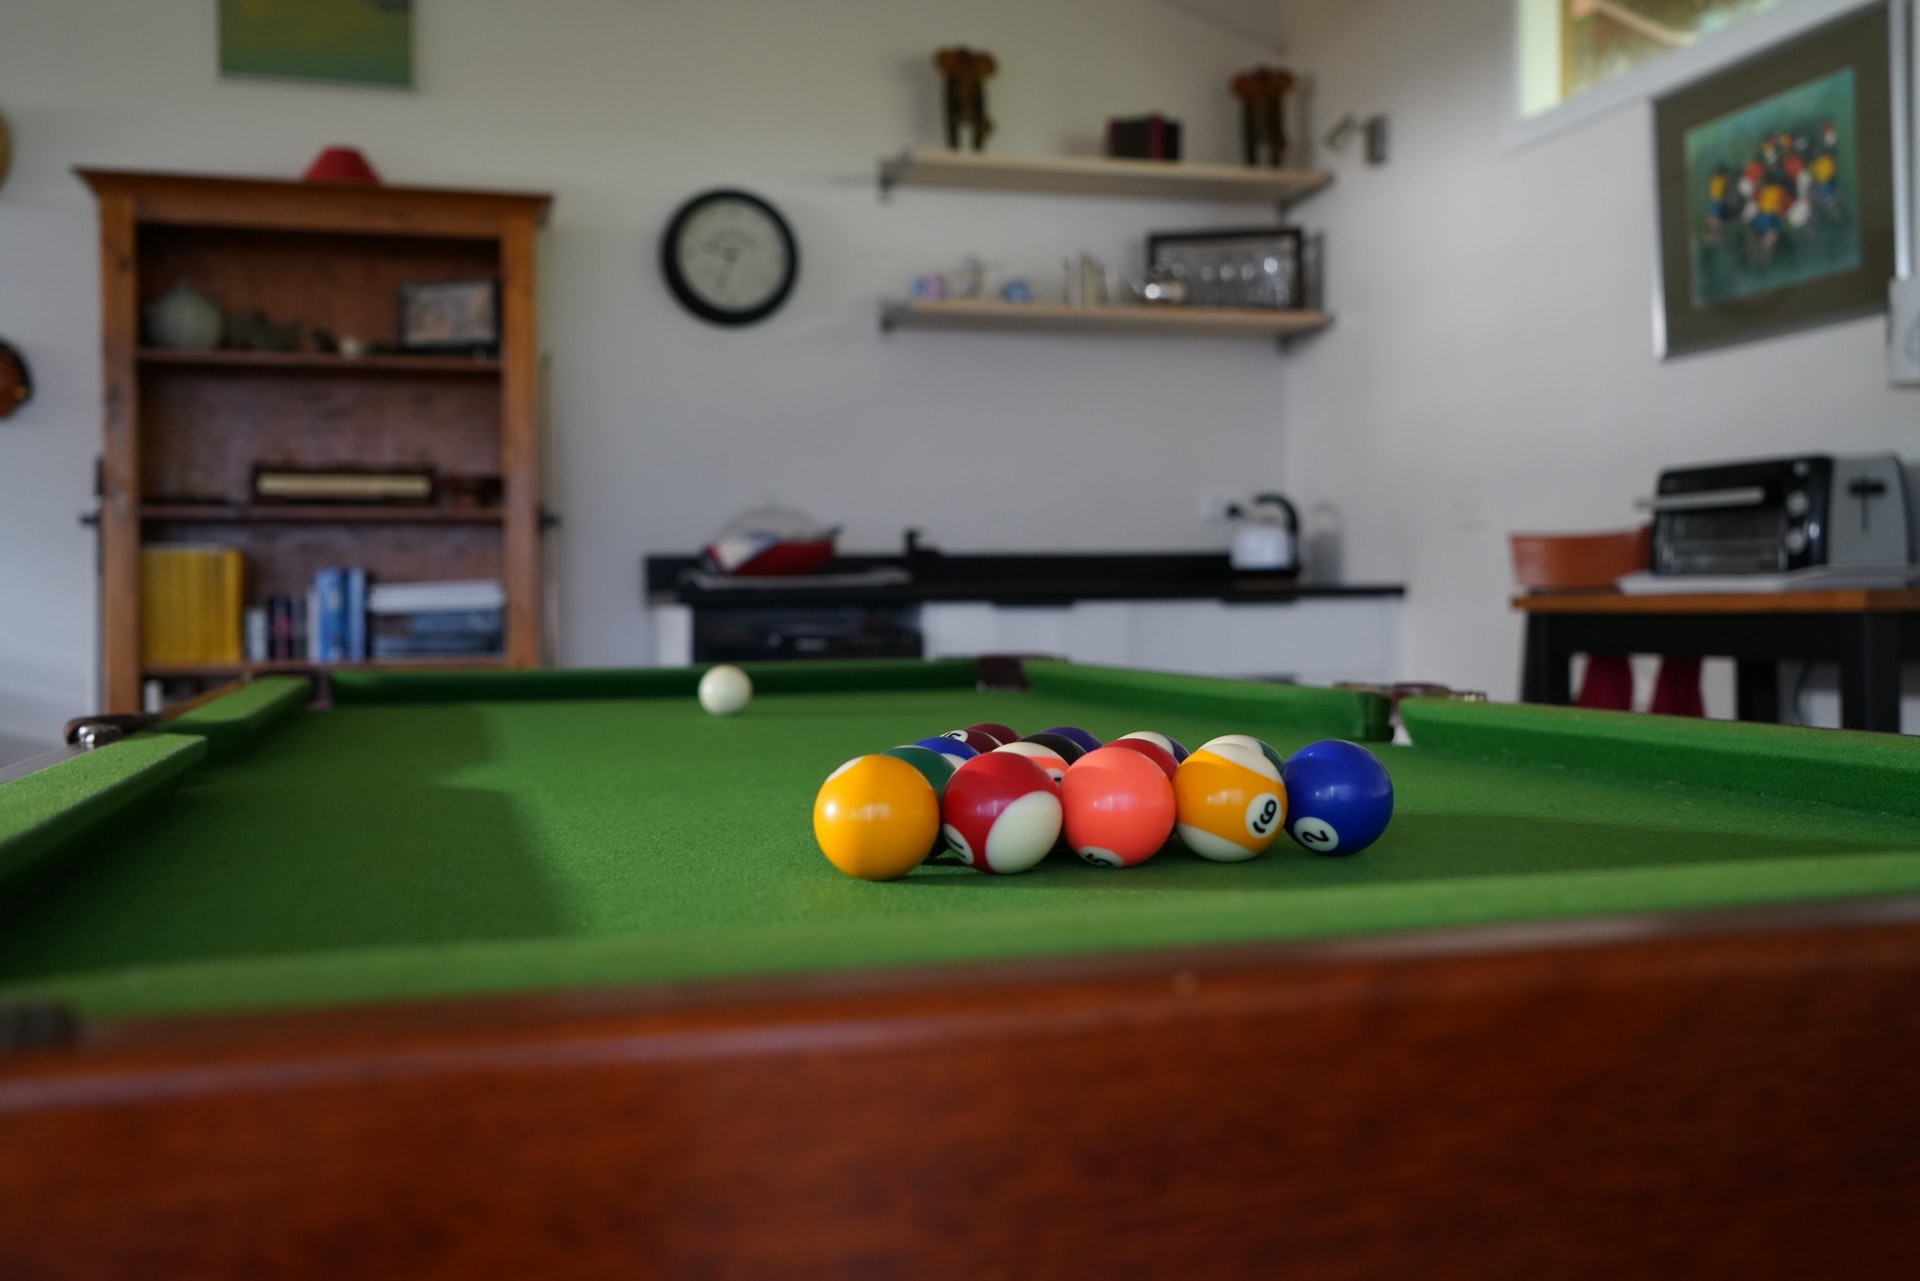 How much should I pay for a used pool table?